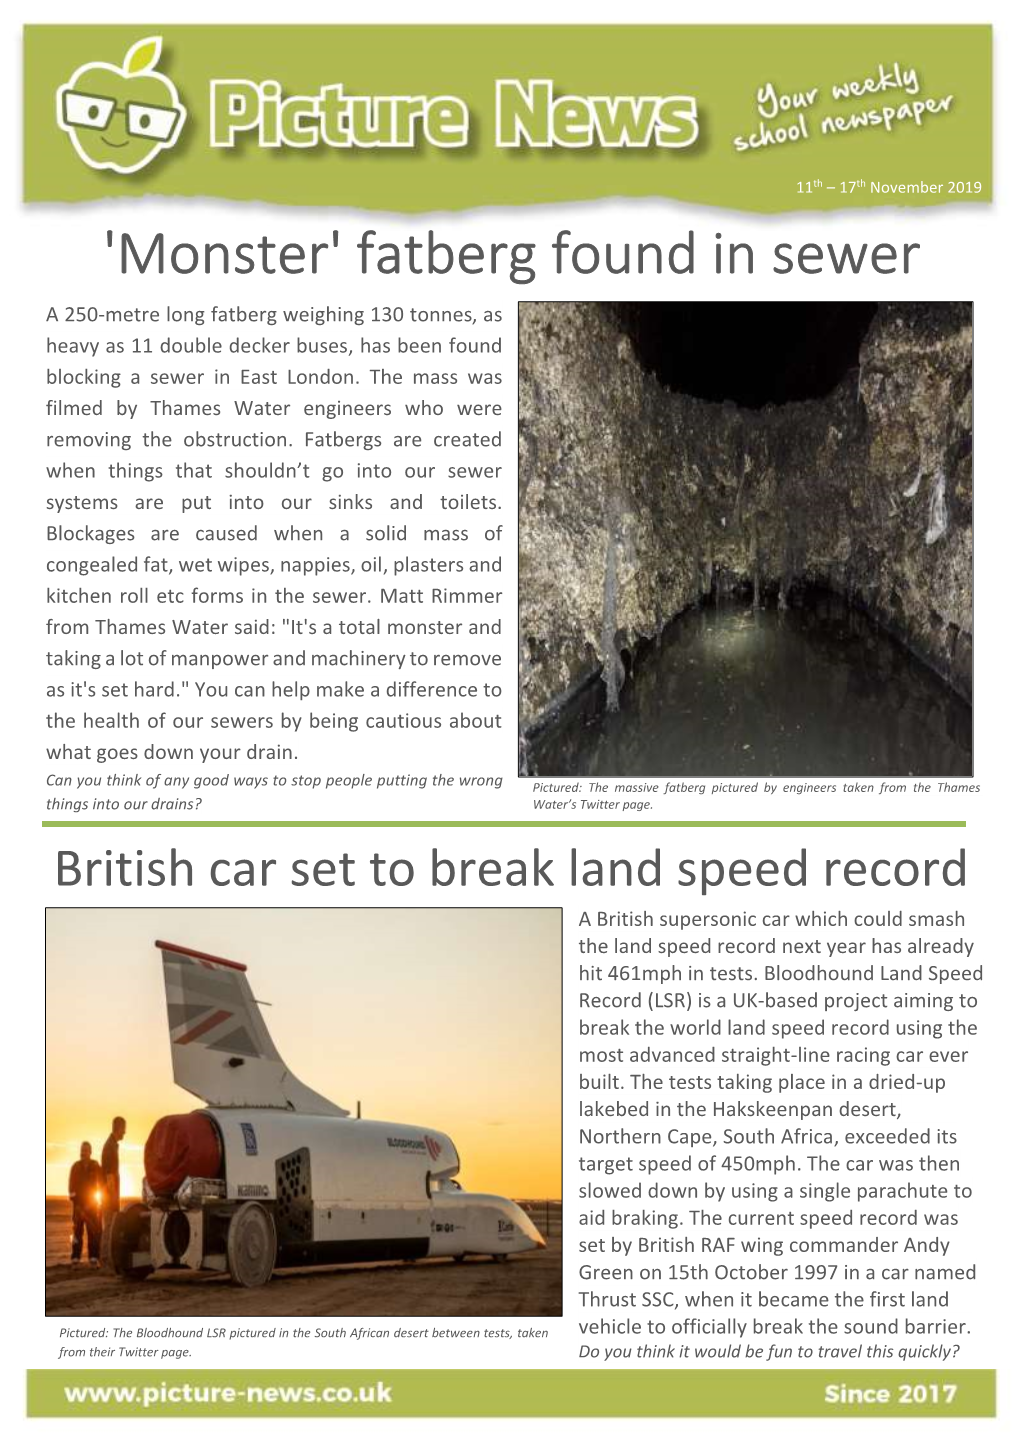 'Monster' Fatberg Found in Sewer